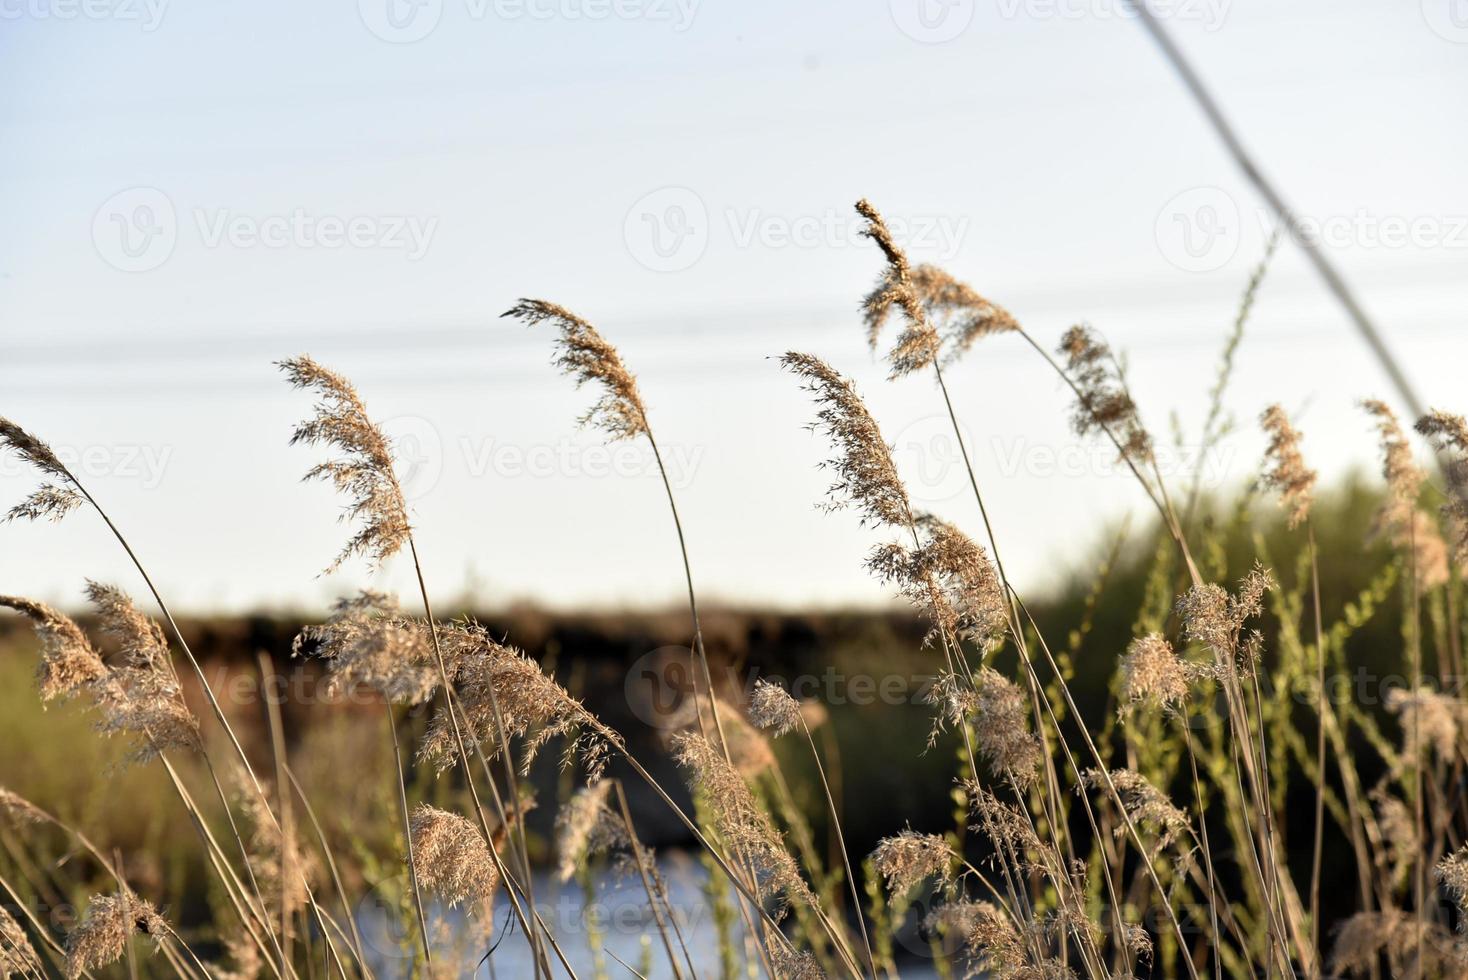 Scirpus reed is a genus of perennial and annual coastal aquatic plants of the Sedge family photo